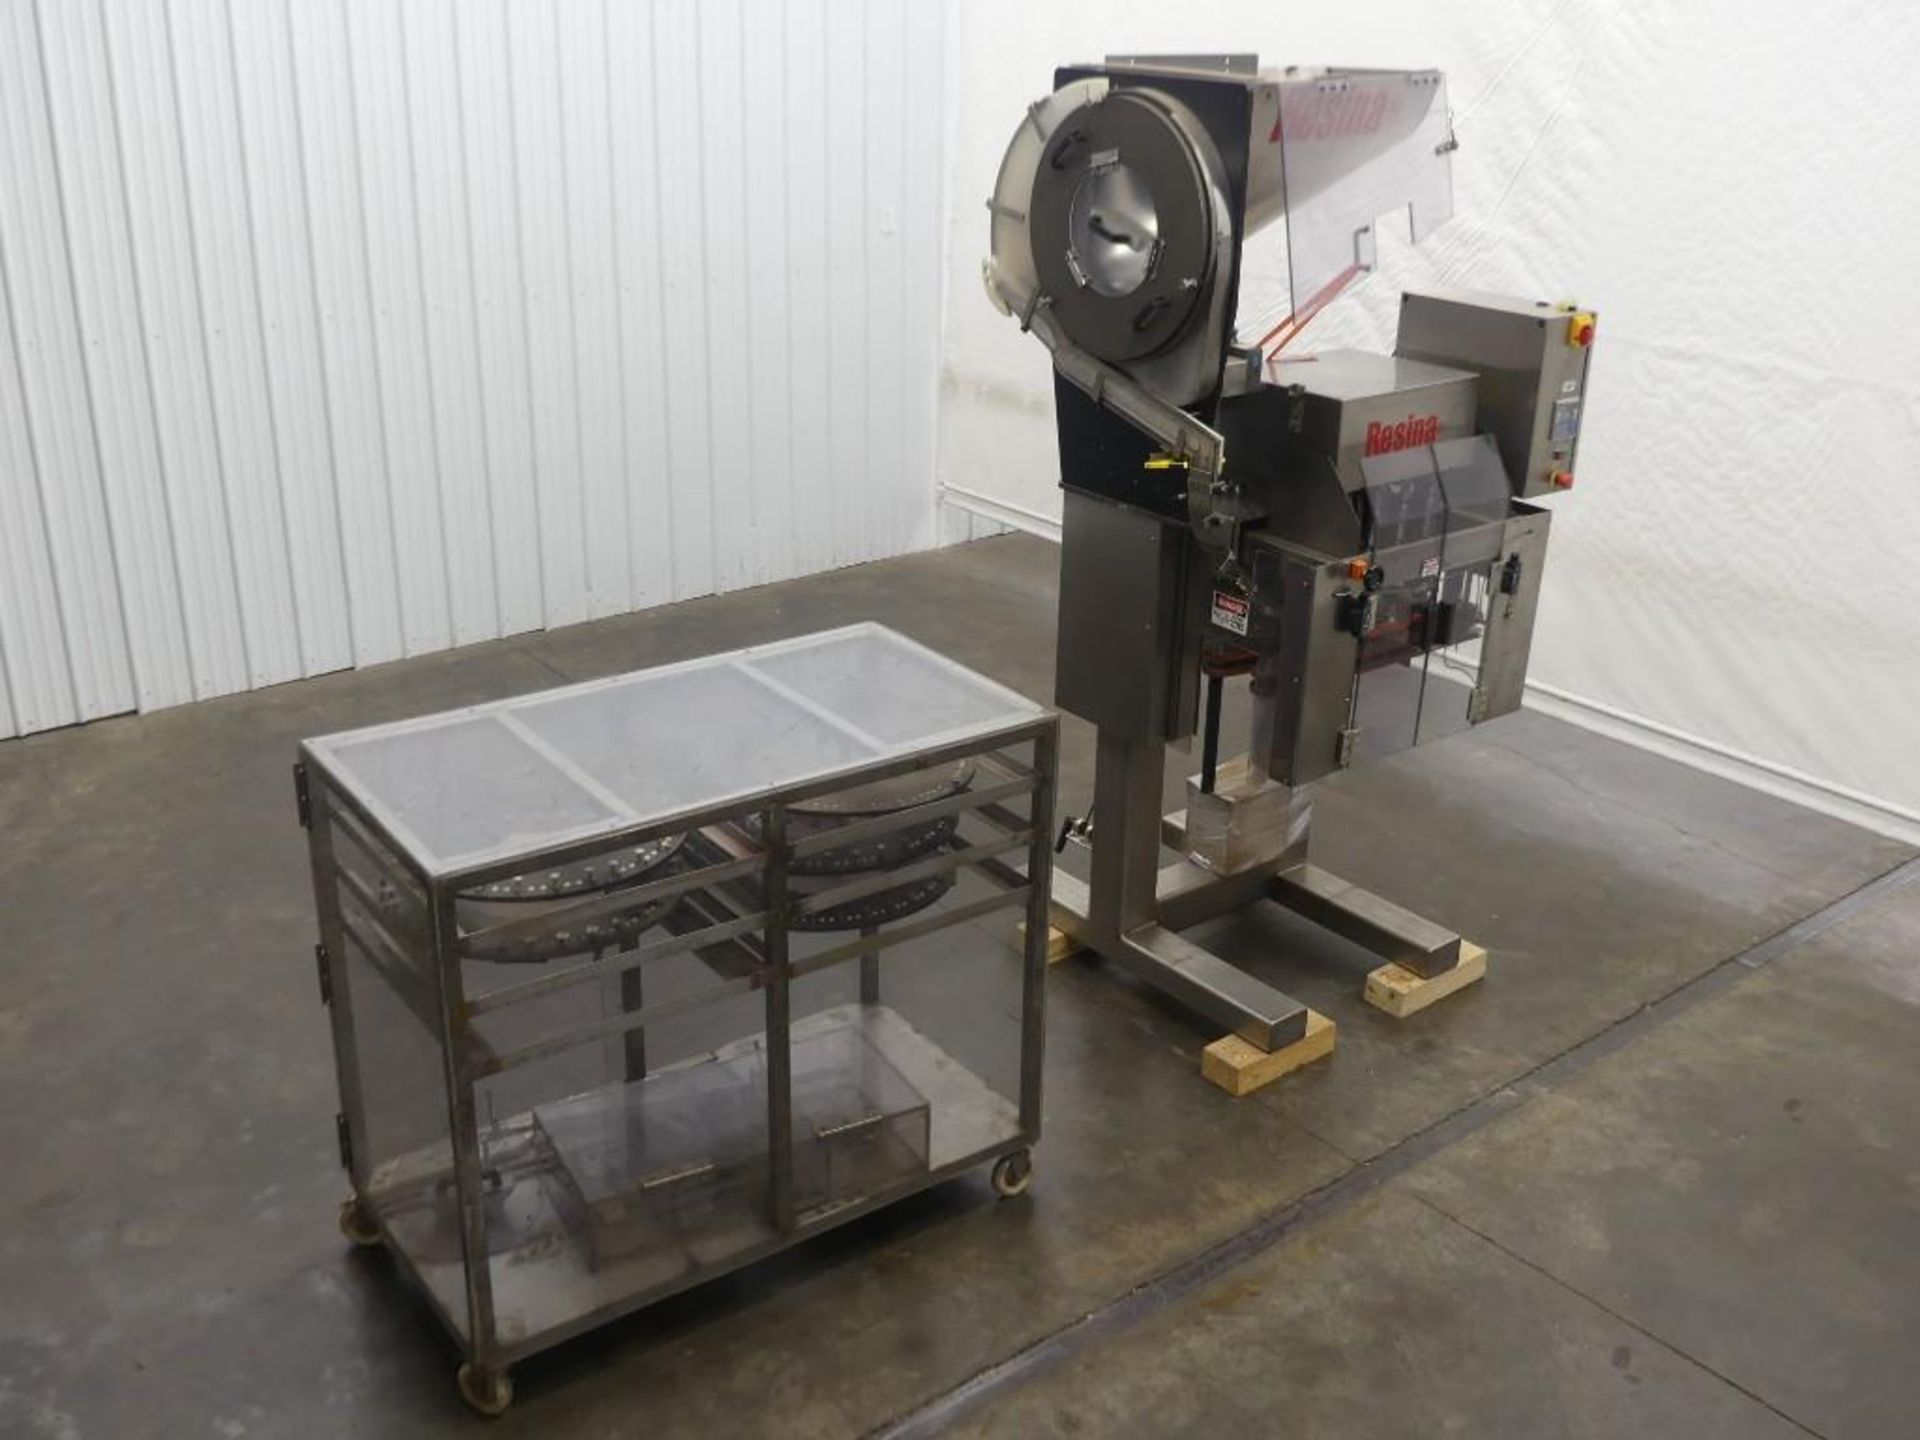 Resina NRC40 8 Head Inline Spindle Capper with Cap Hopper and Dual Gripper Belts - Image 2 of 46